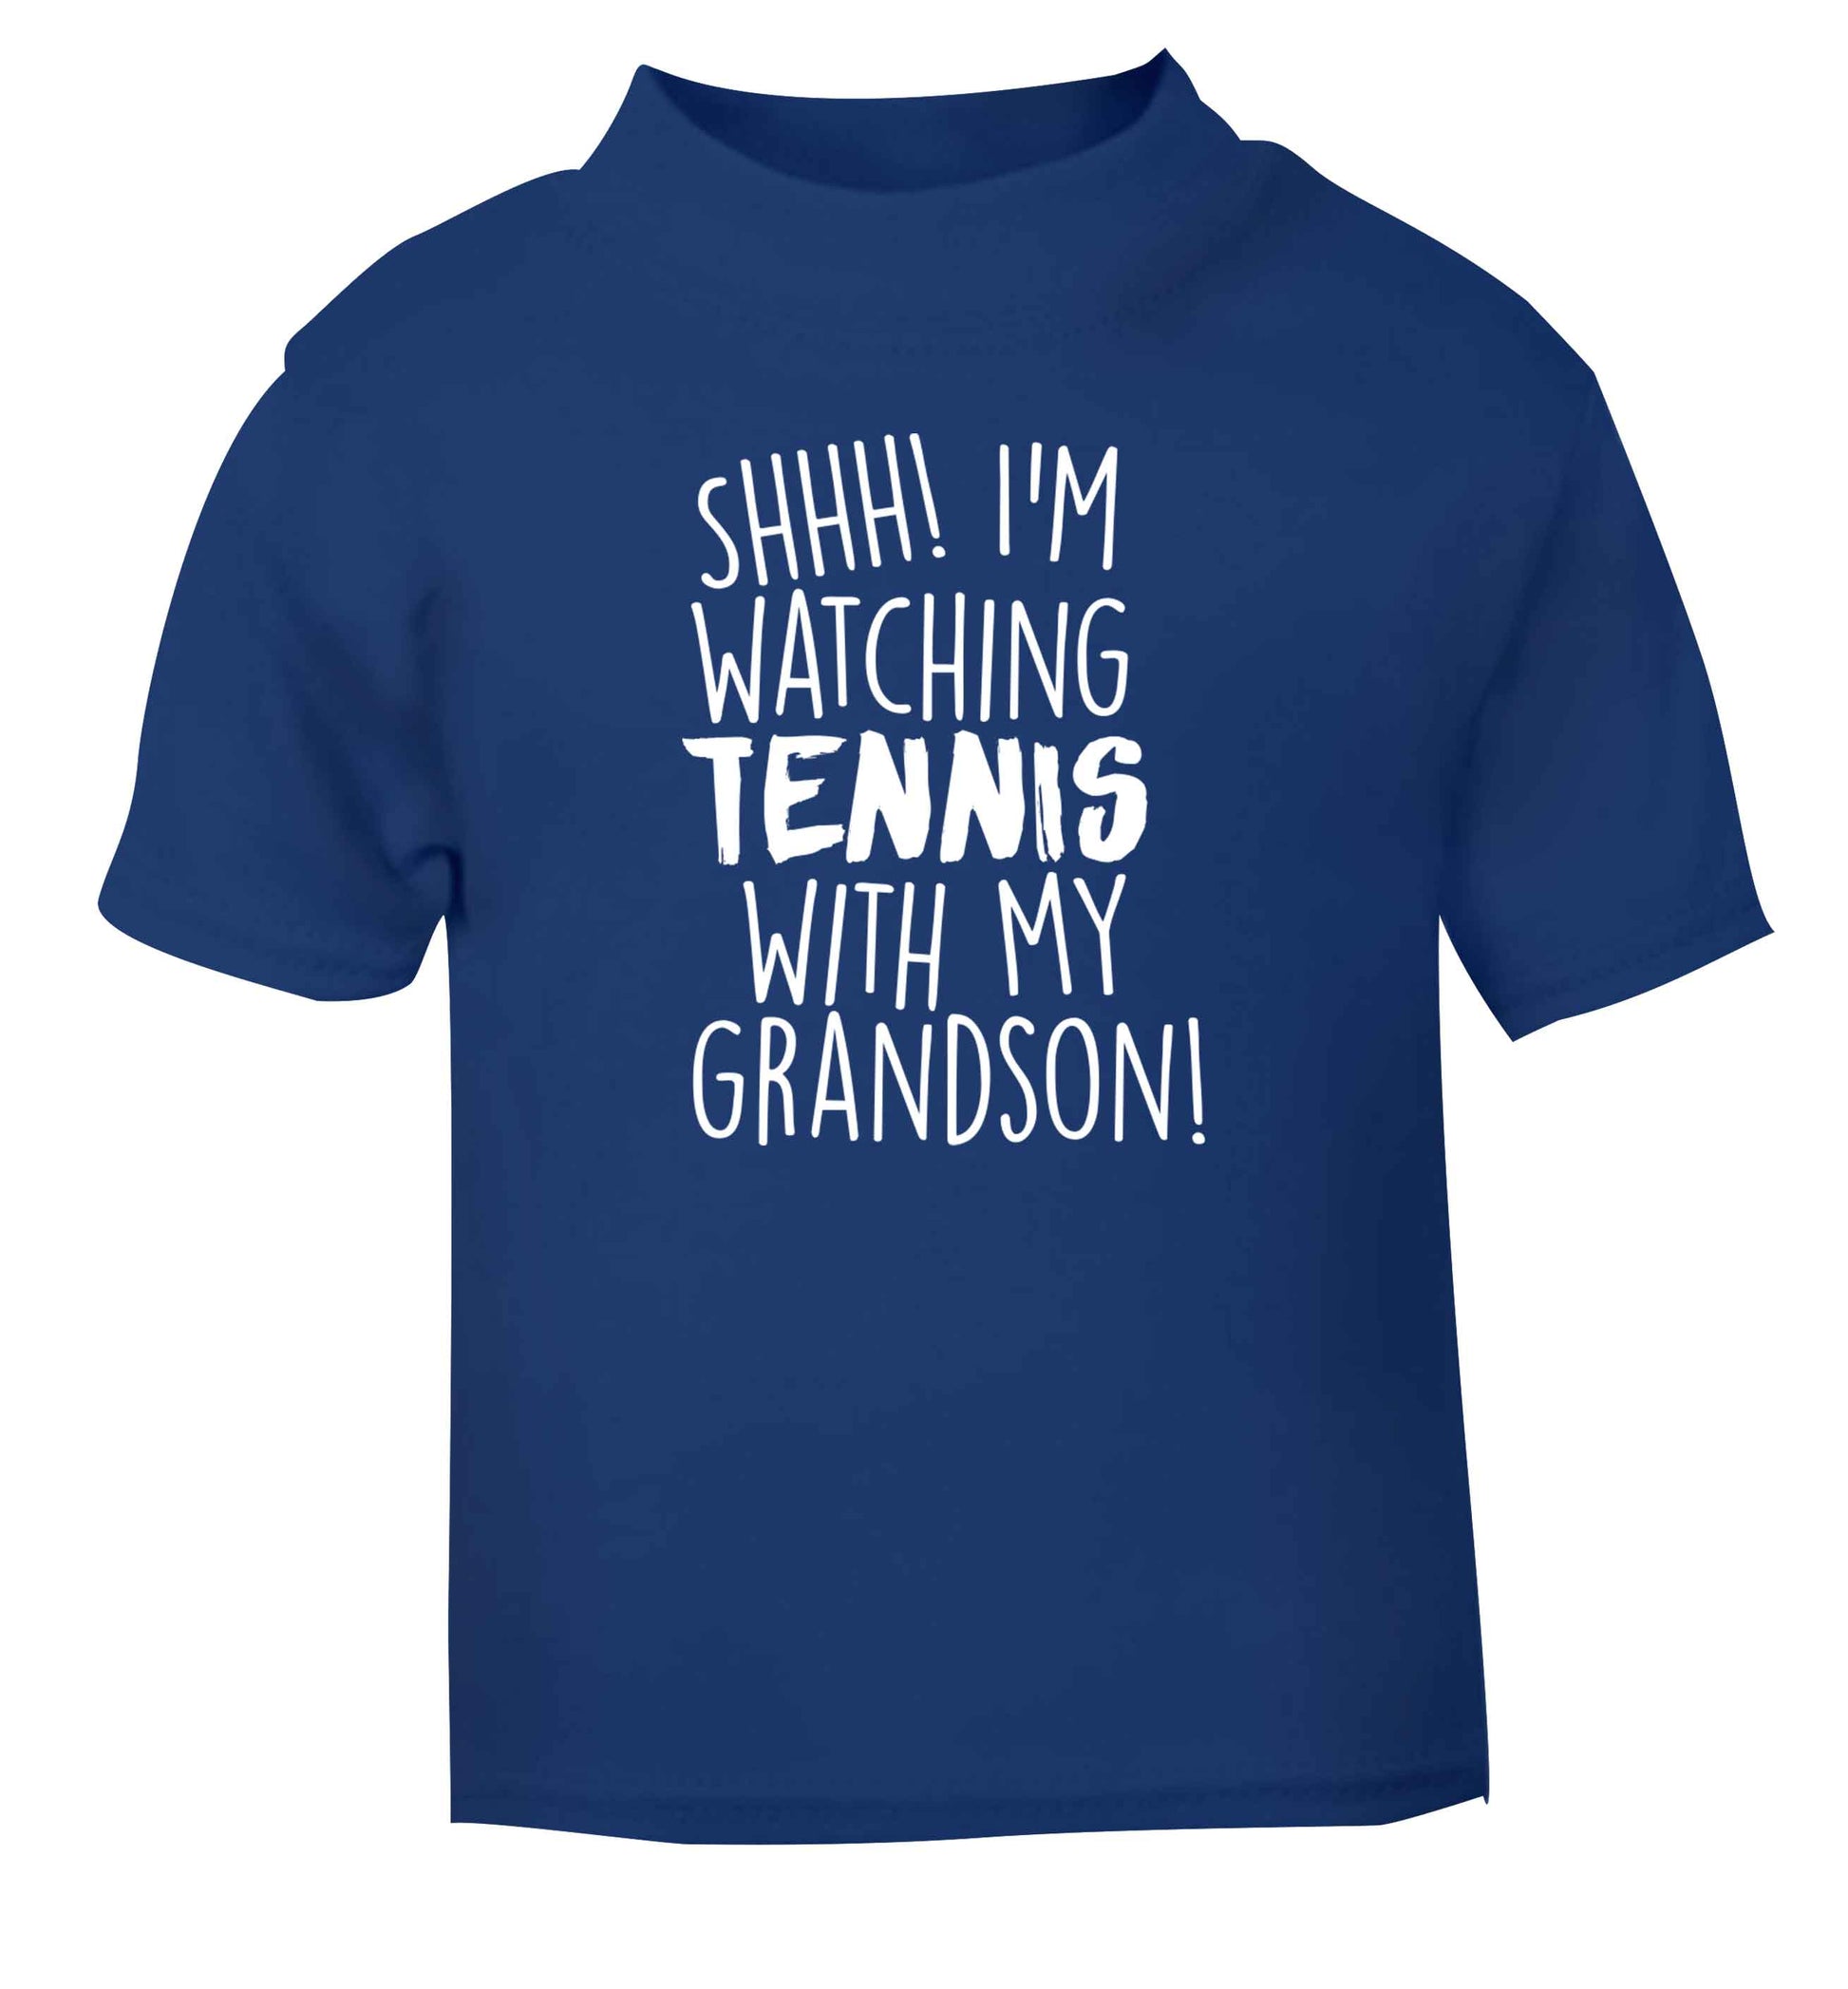 Shh! I'm watching tennis with my grandson! blue Baby Toddler Tshirt 2 Years